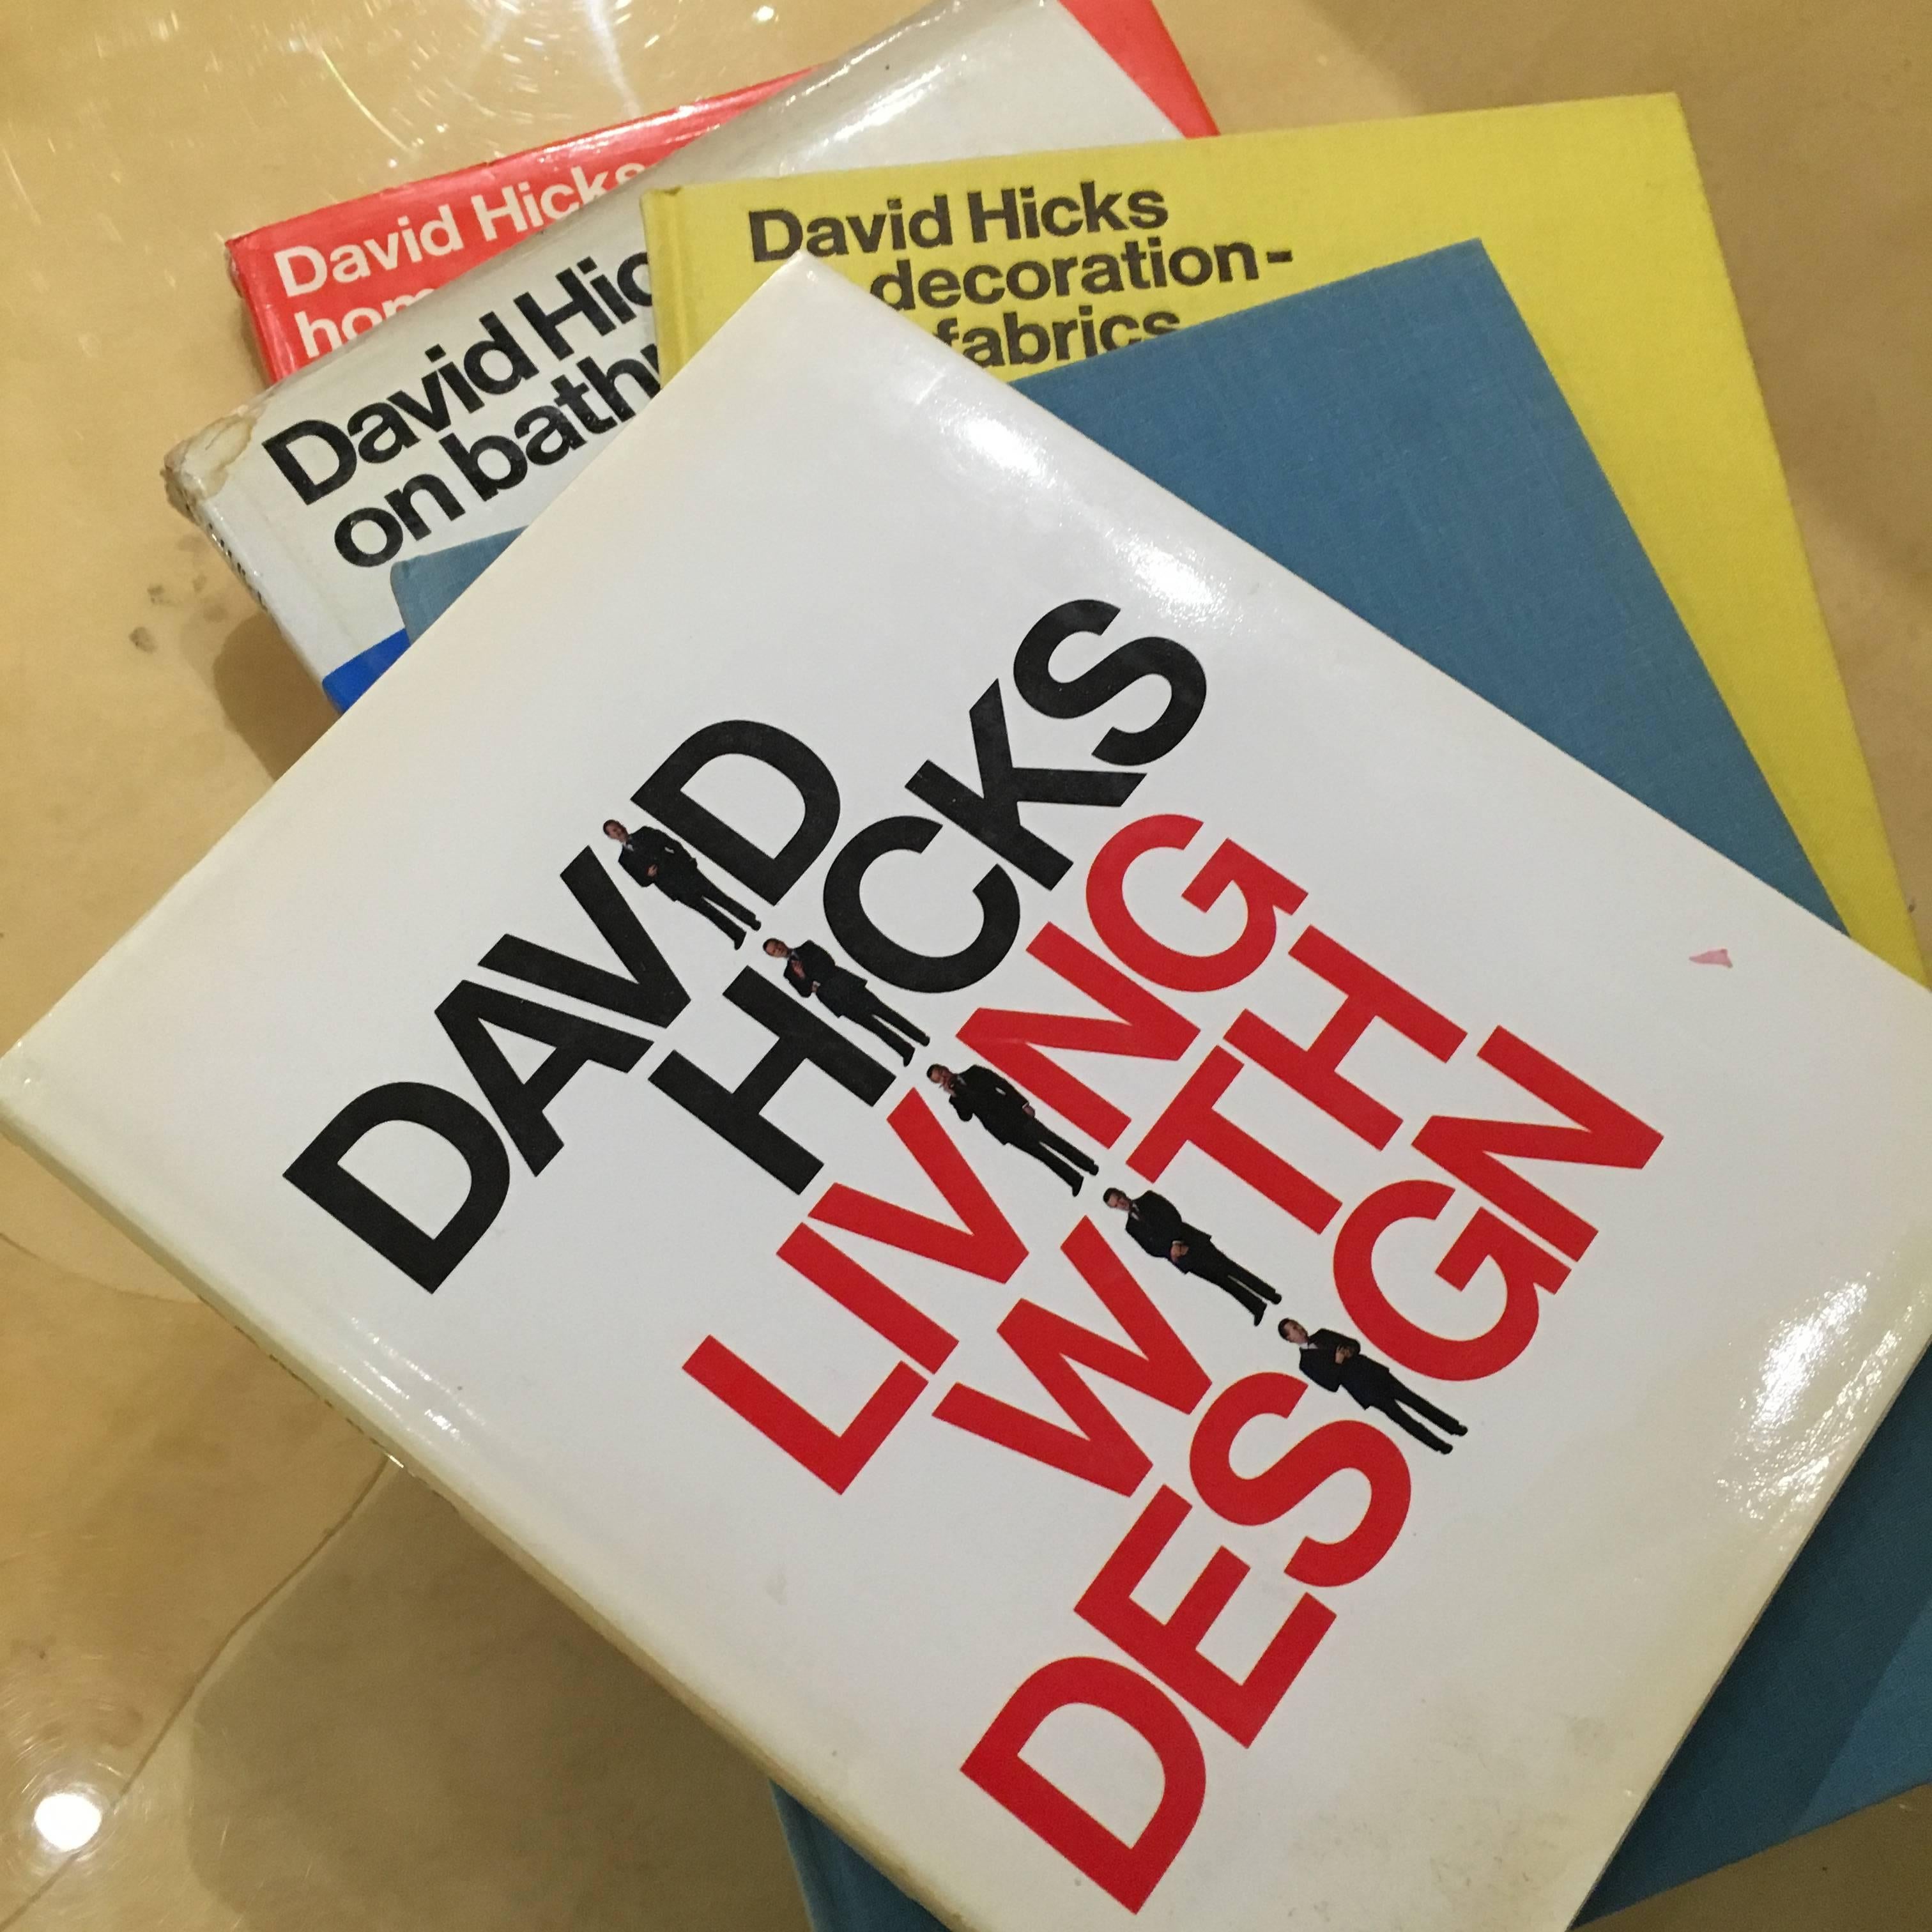 Entire series of David Hicks books on design, including the very rare book
on taste. The books are somewhat used, two are missing the dust jacket,
and one dust jacket is slightly torn, see image. The books are in good 
condition, no torn pages,